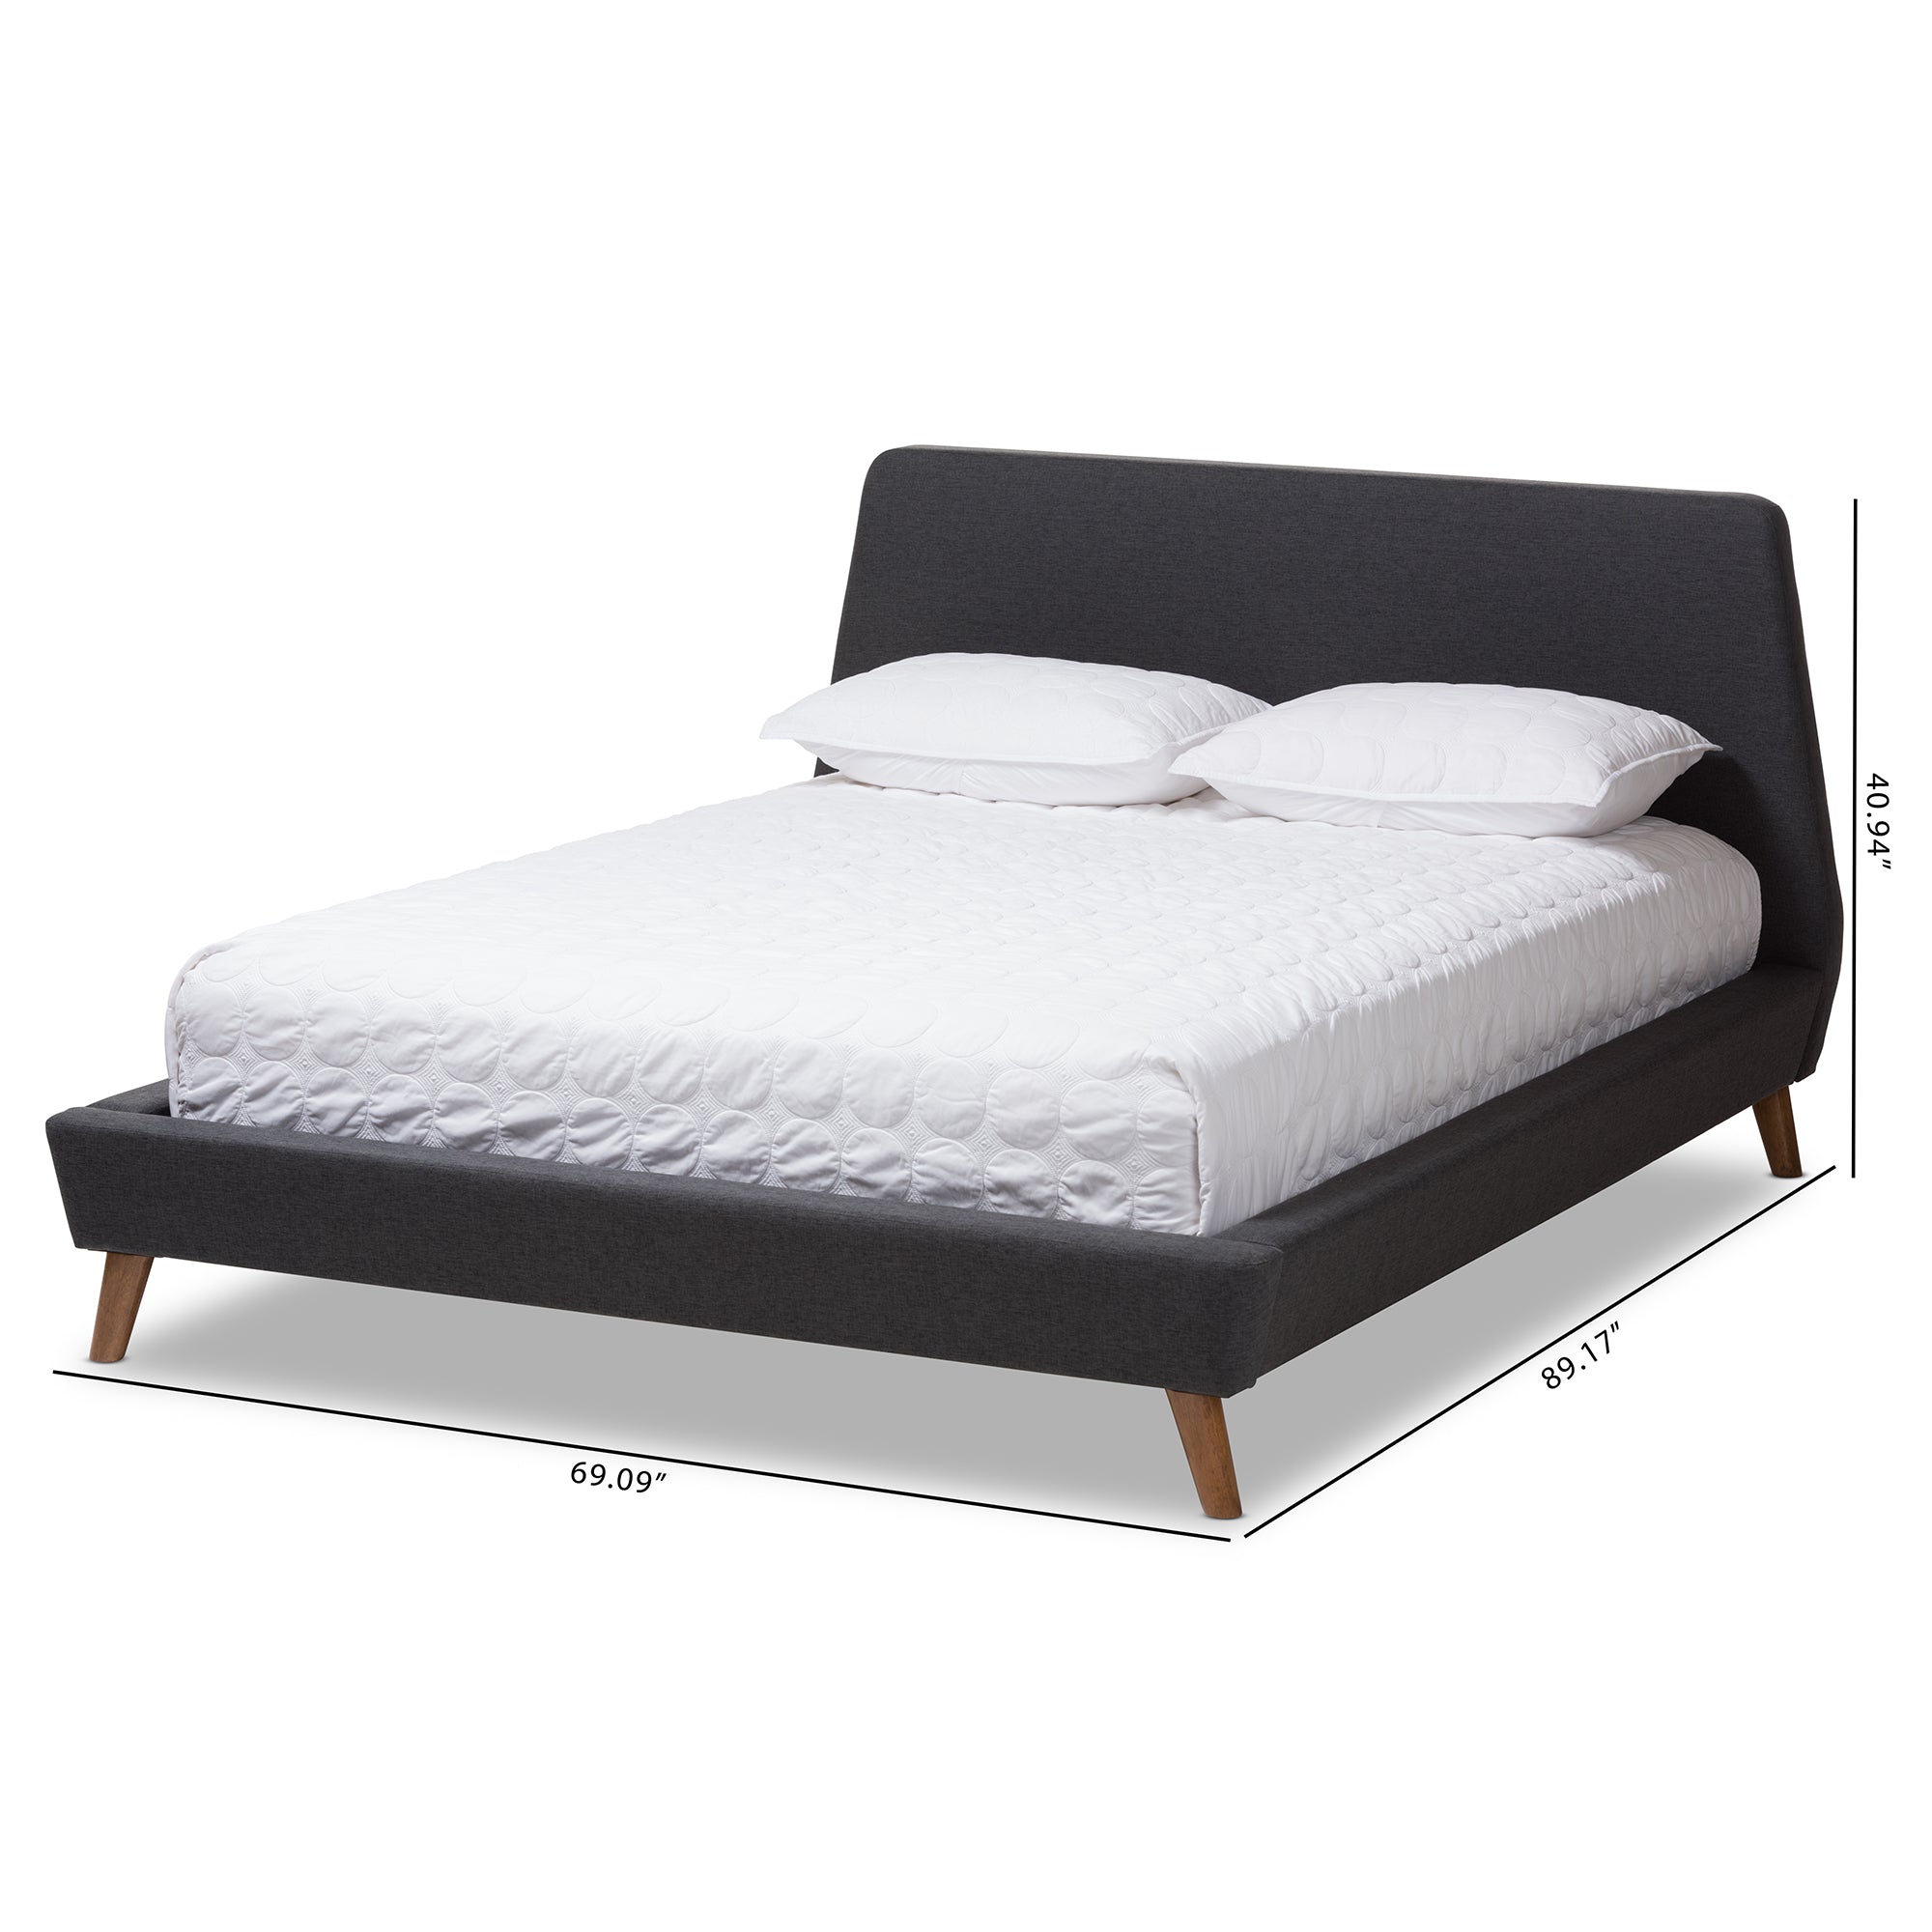 Sinclaire Contemporary Bed Walnut-Finished-Bed-Baxton Studio - WI-Wall2Wall Furnishings